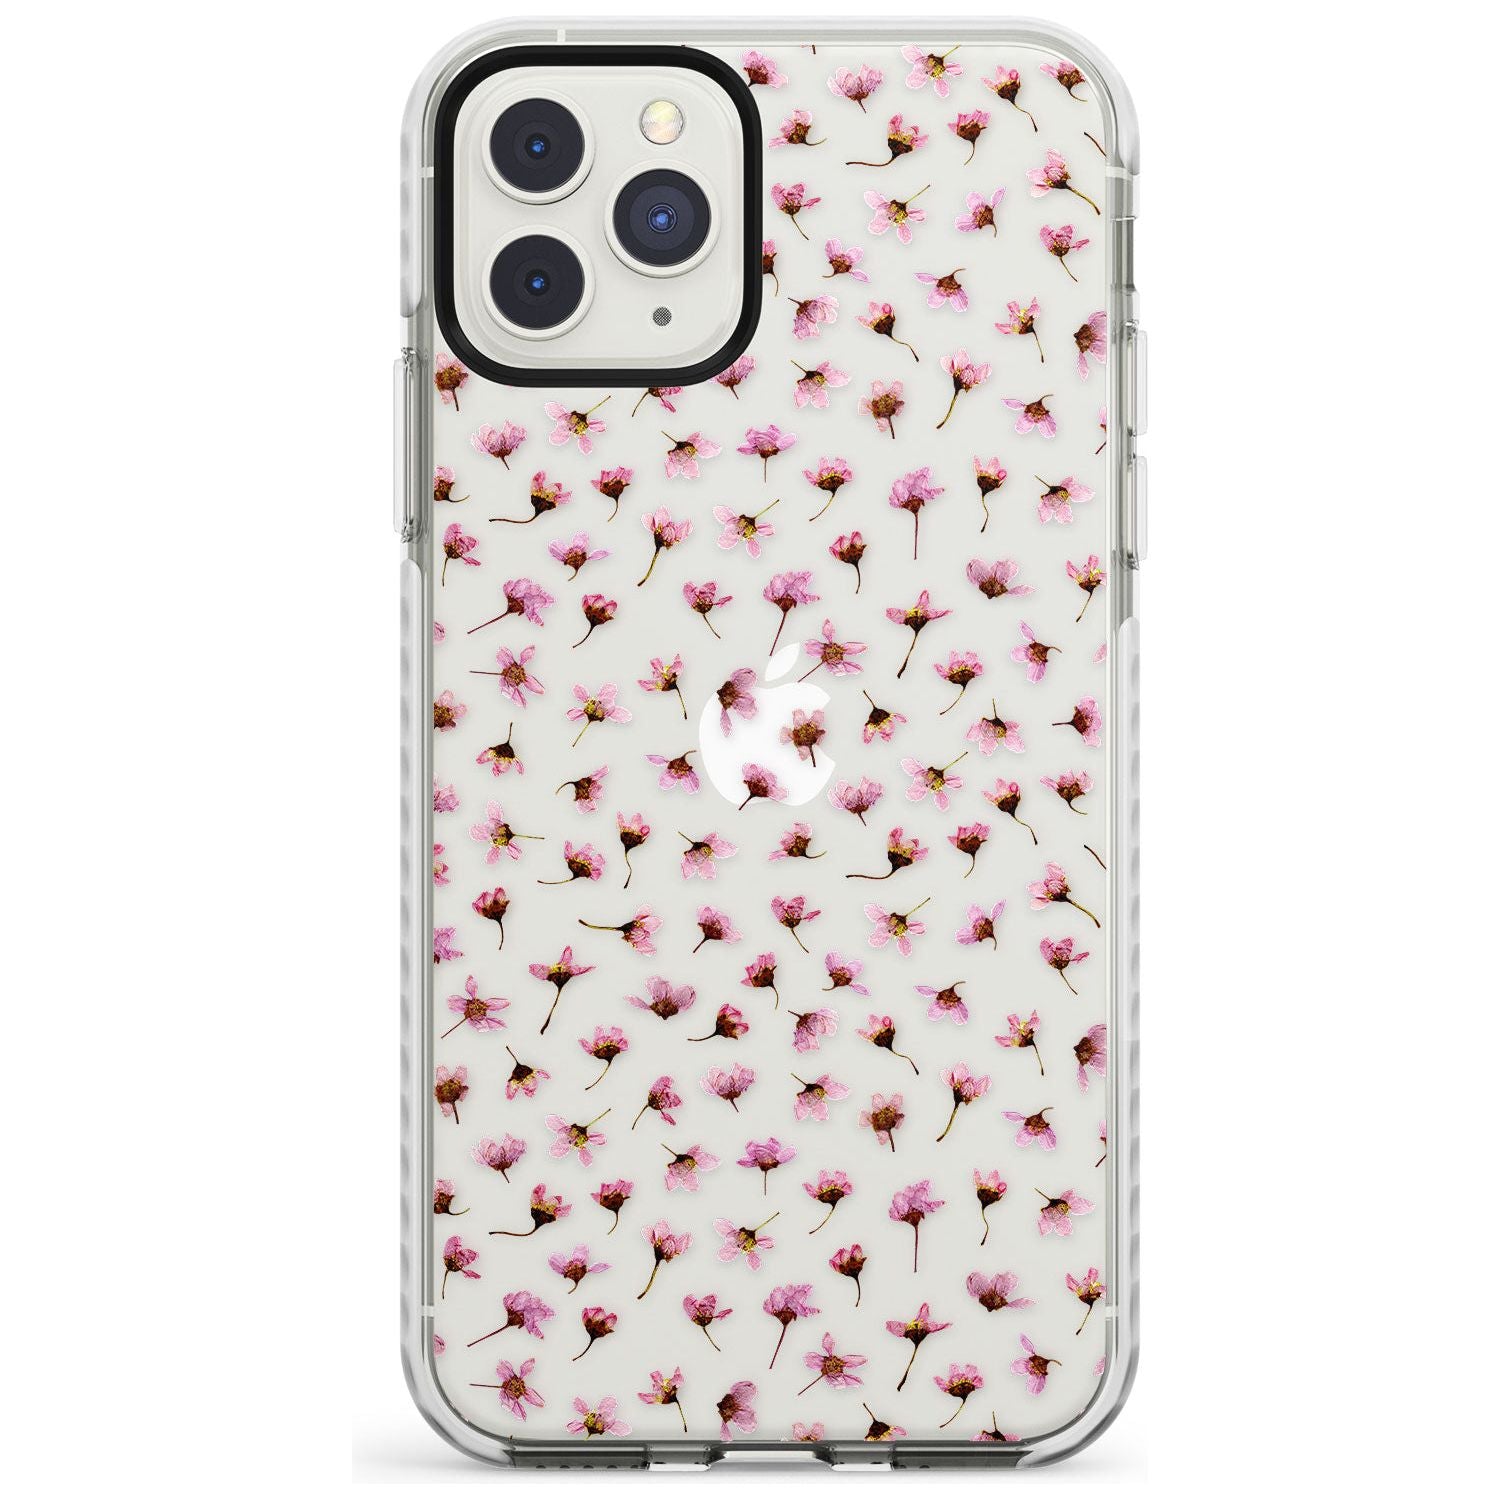 Small Pink Blossoms Transparent Design Impact Phone Case for iPhone 11 Pro Max